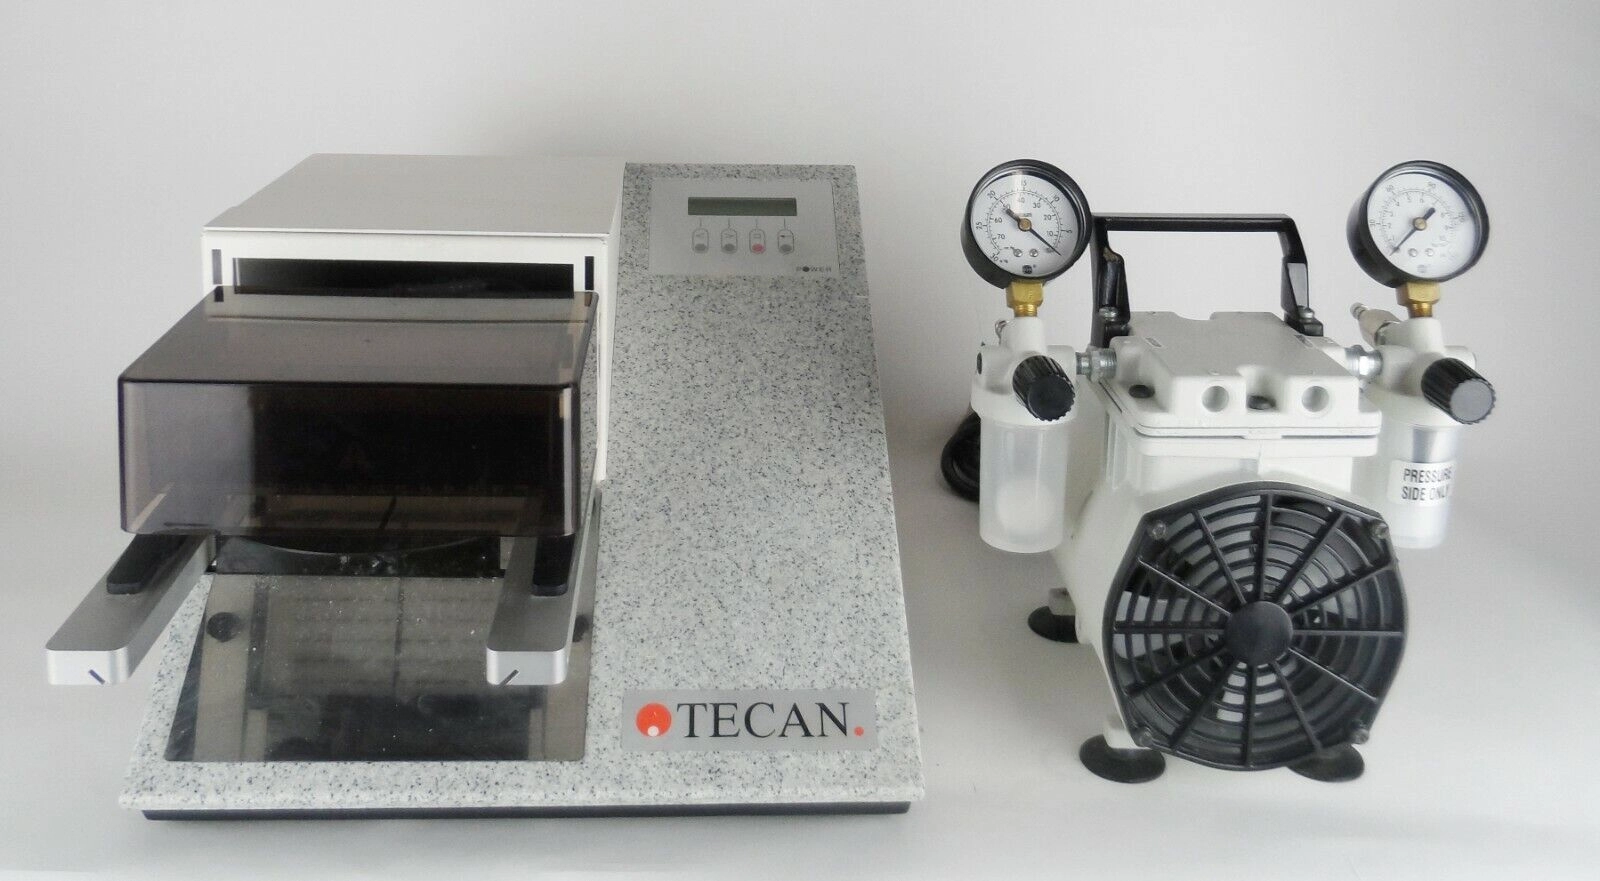 Tecan 96PW-Tecan CE Micro Plate Washer with Vacuum